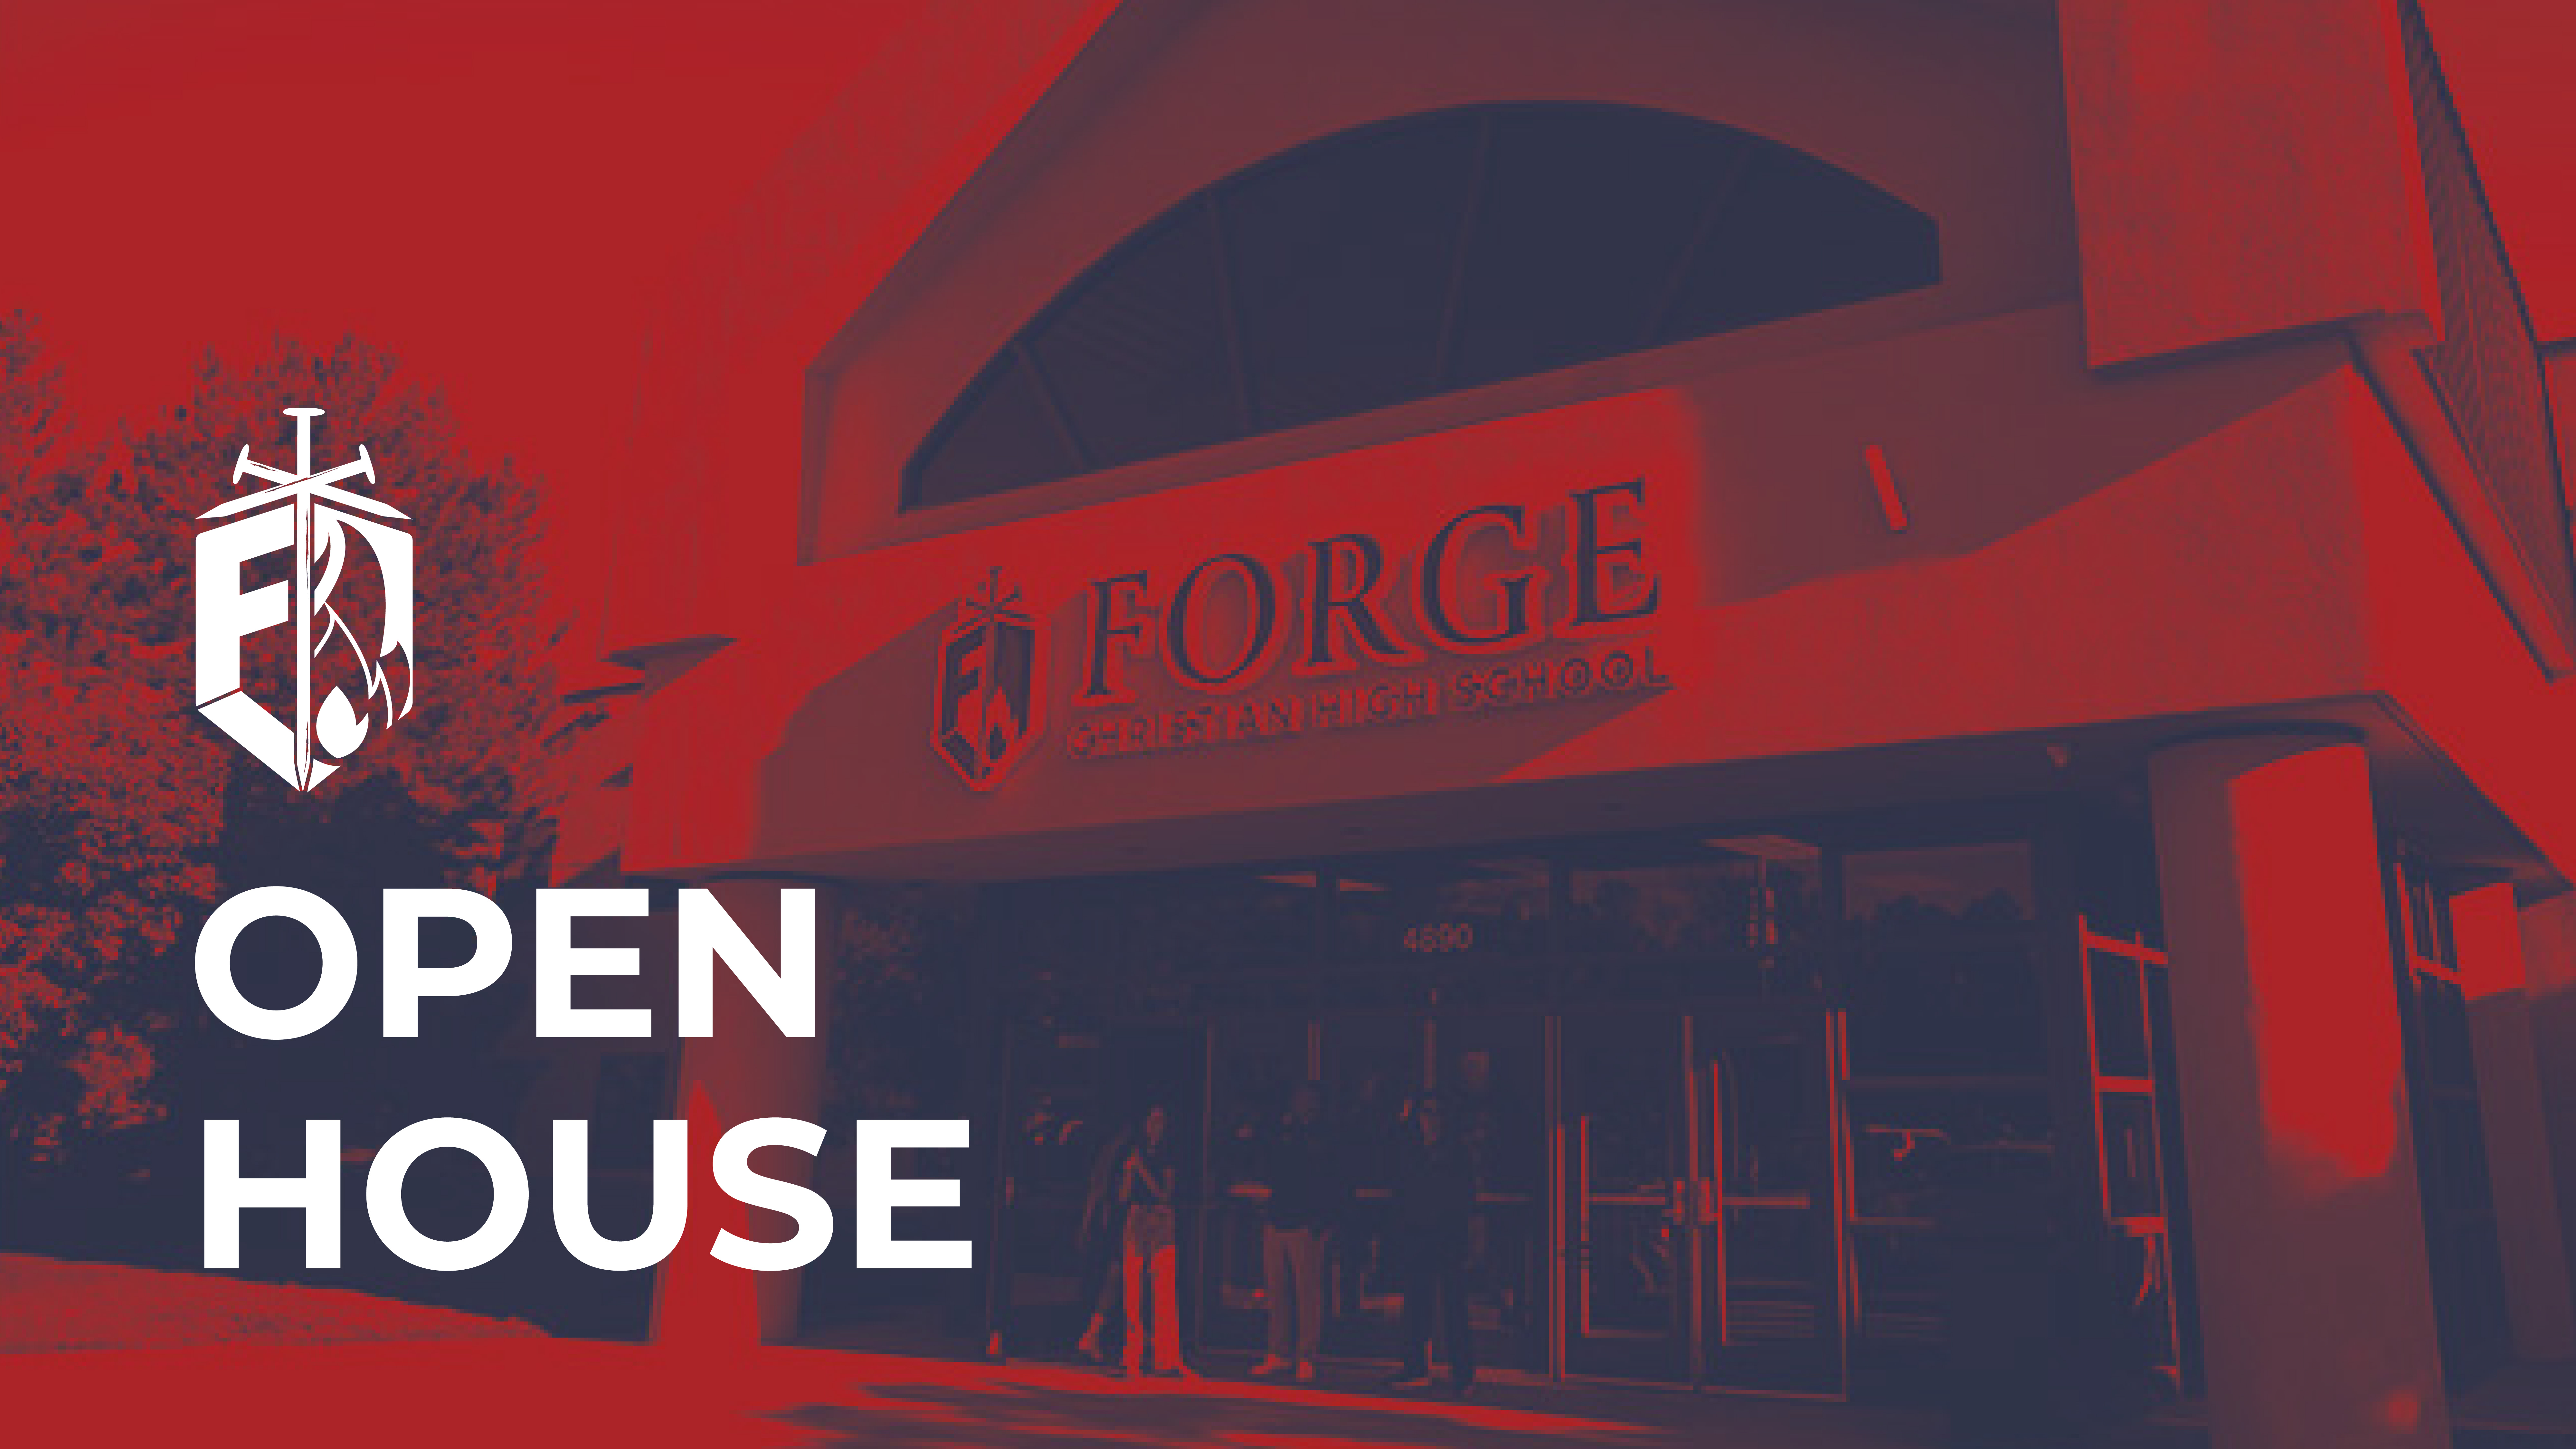 Forge Open House

Wednesday | 6:30-8:00pm
March 6
